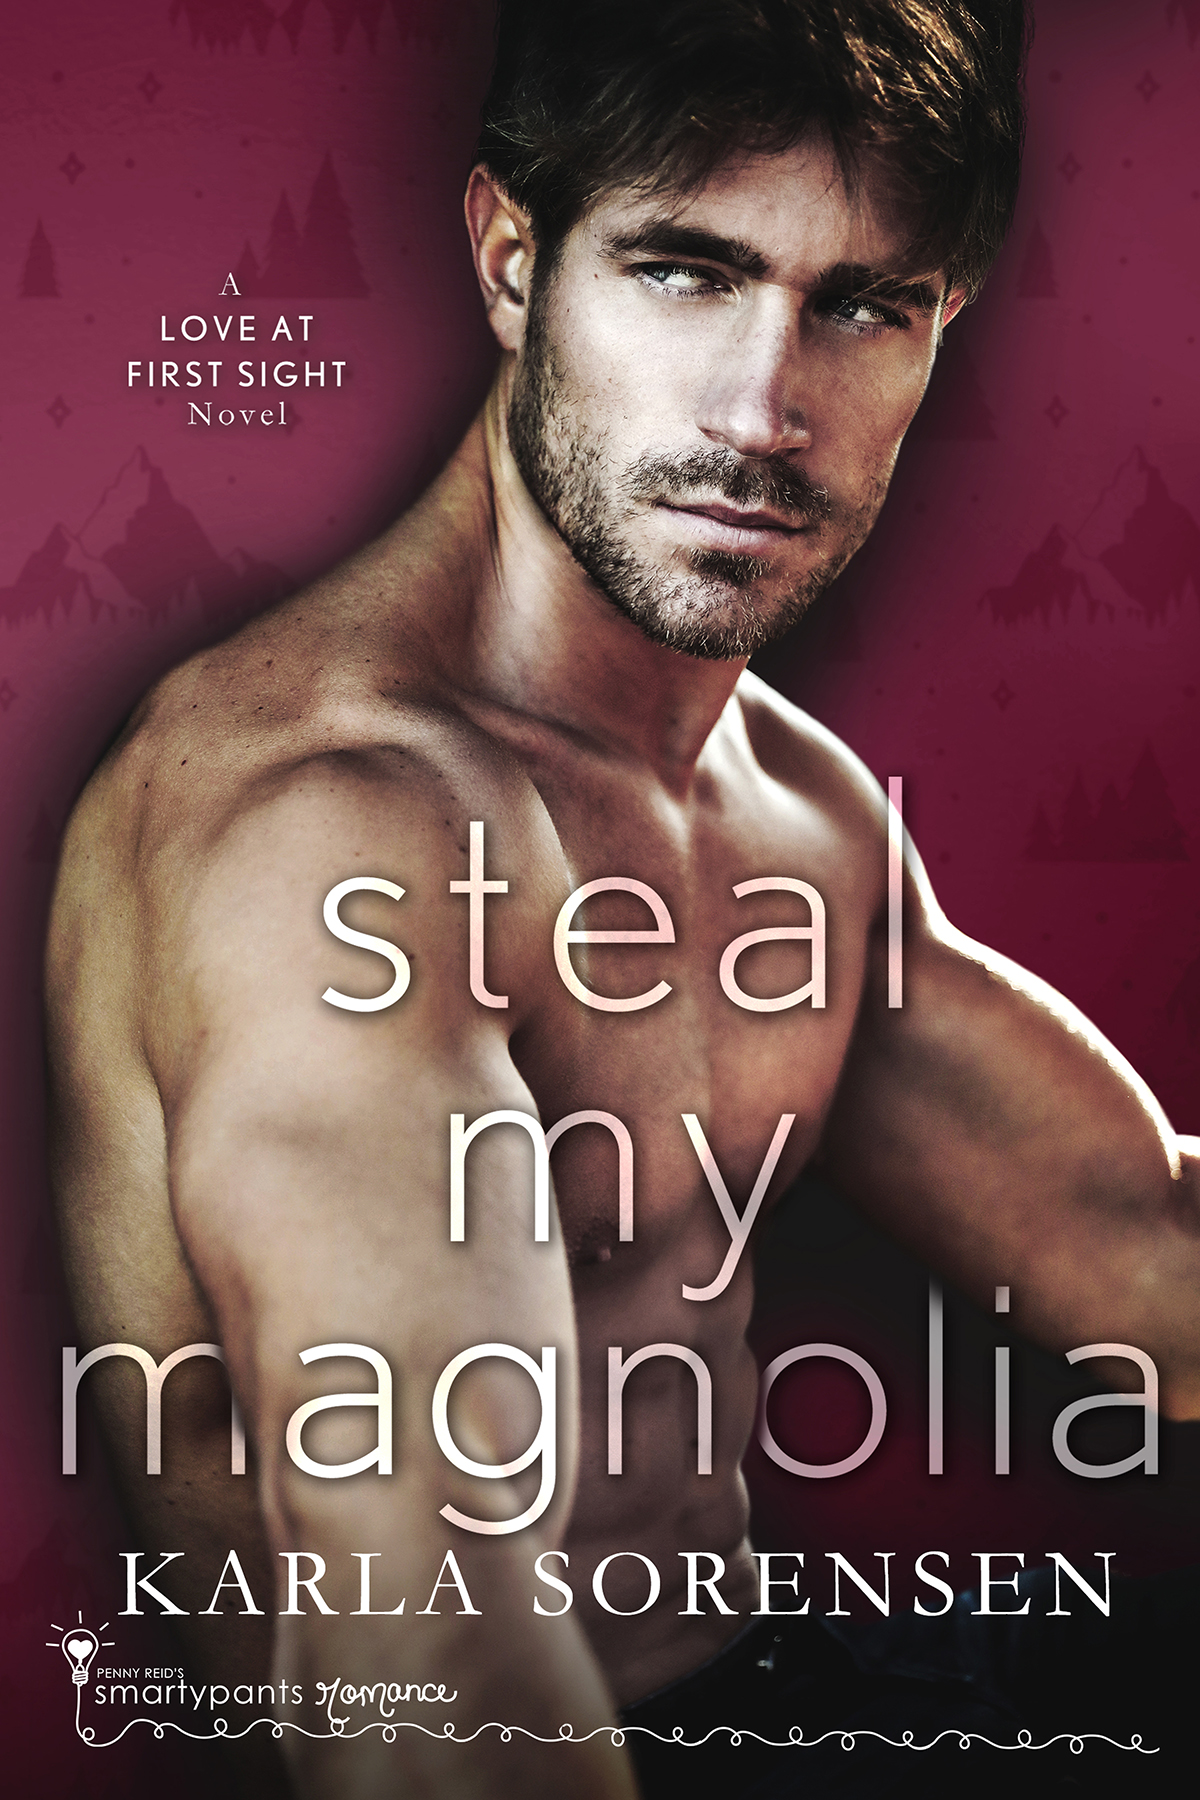 [EPUB] Love at First Sight #3 Steal My Magnolia